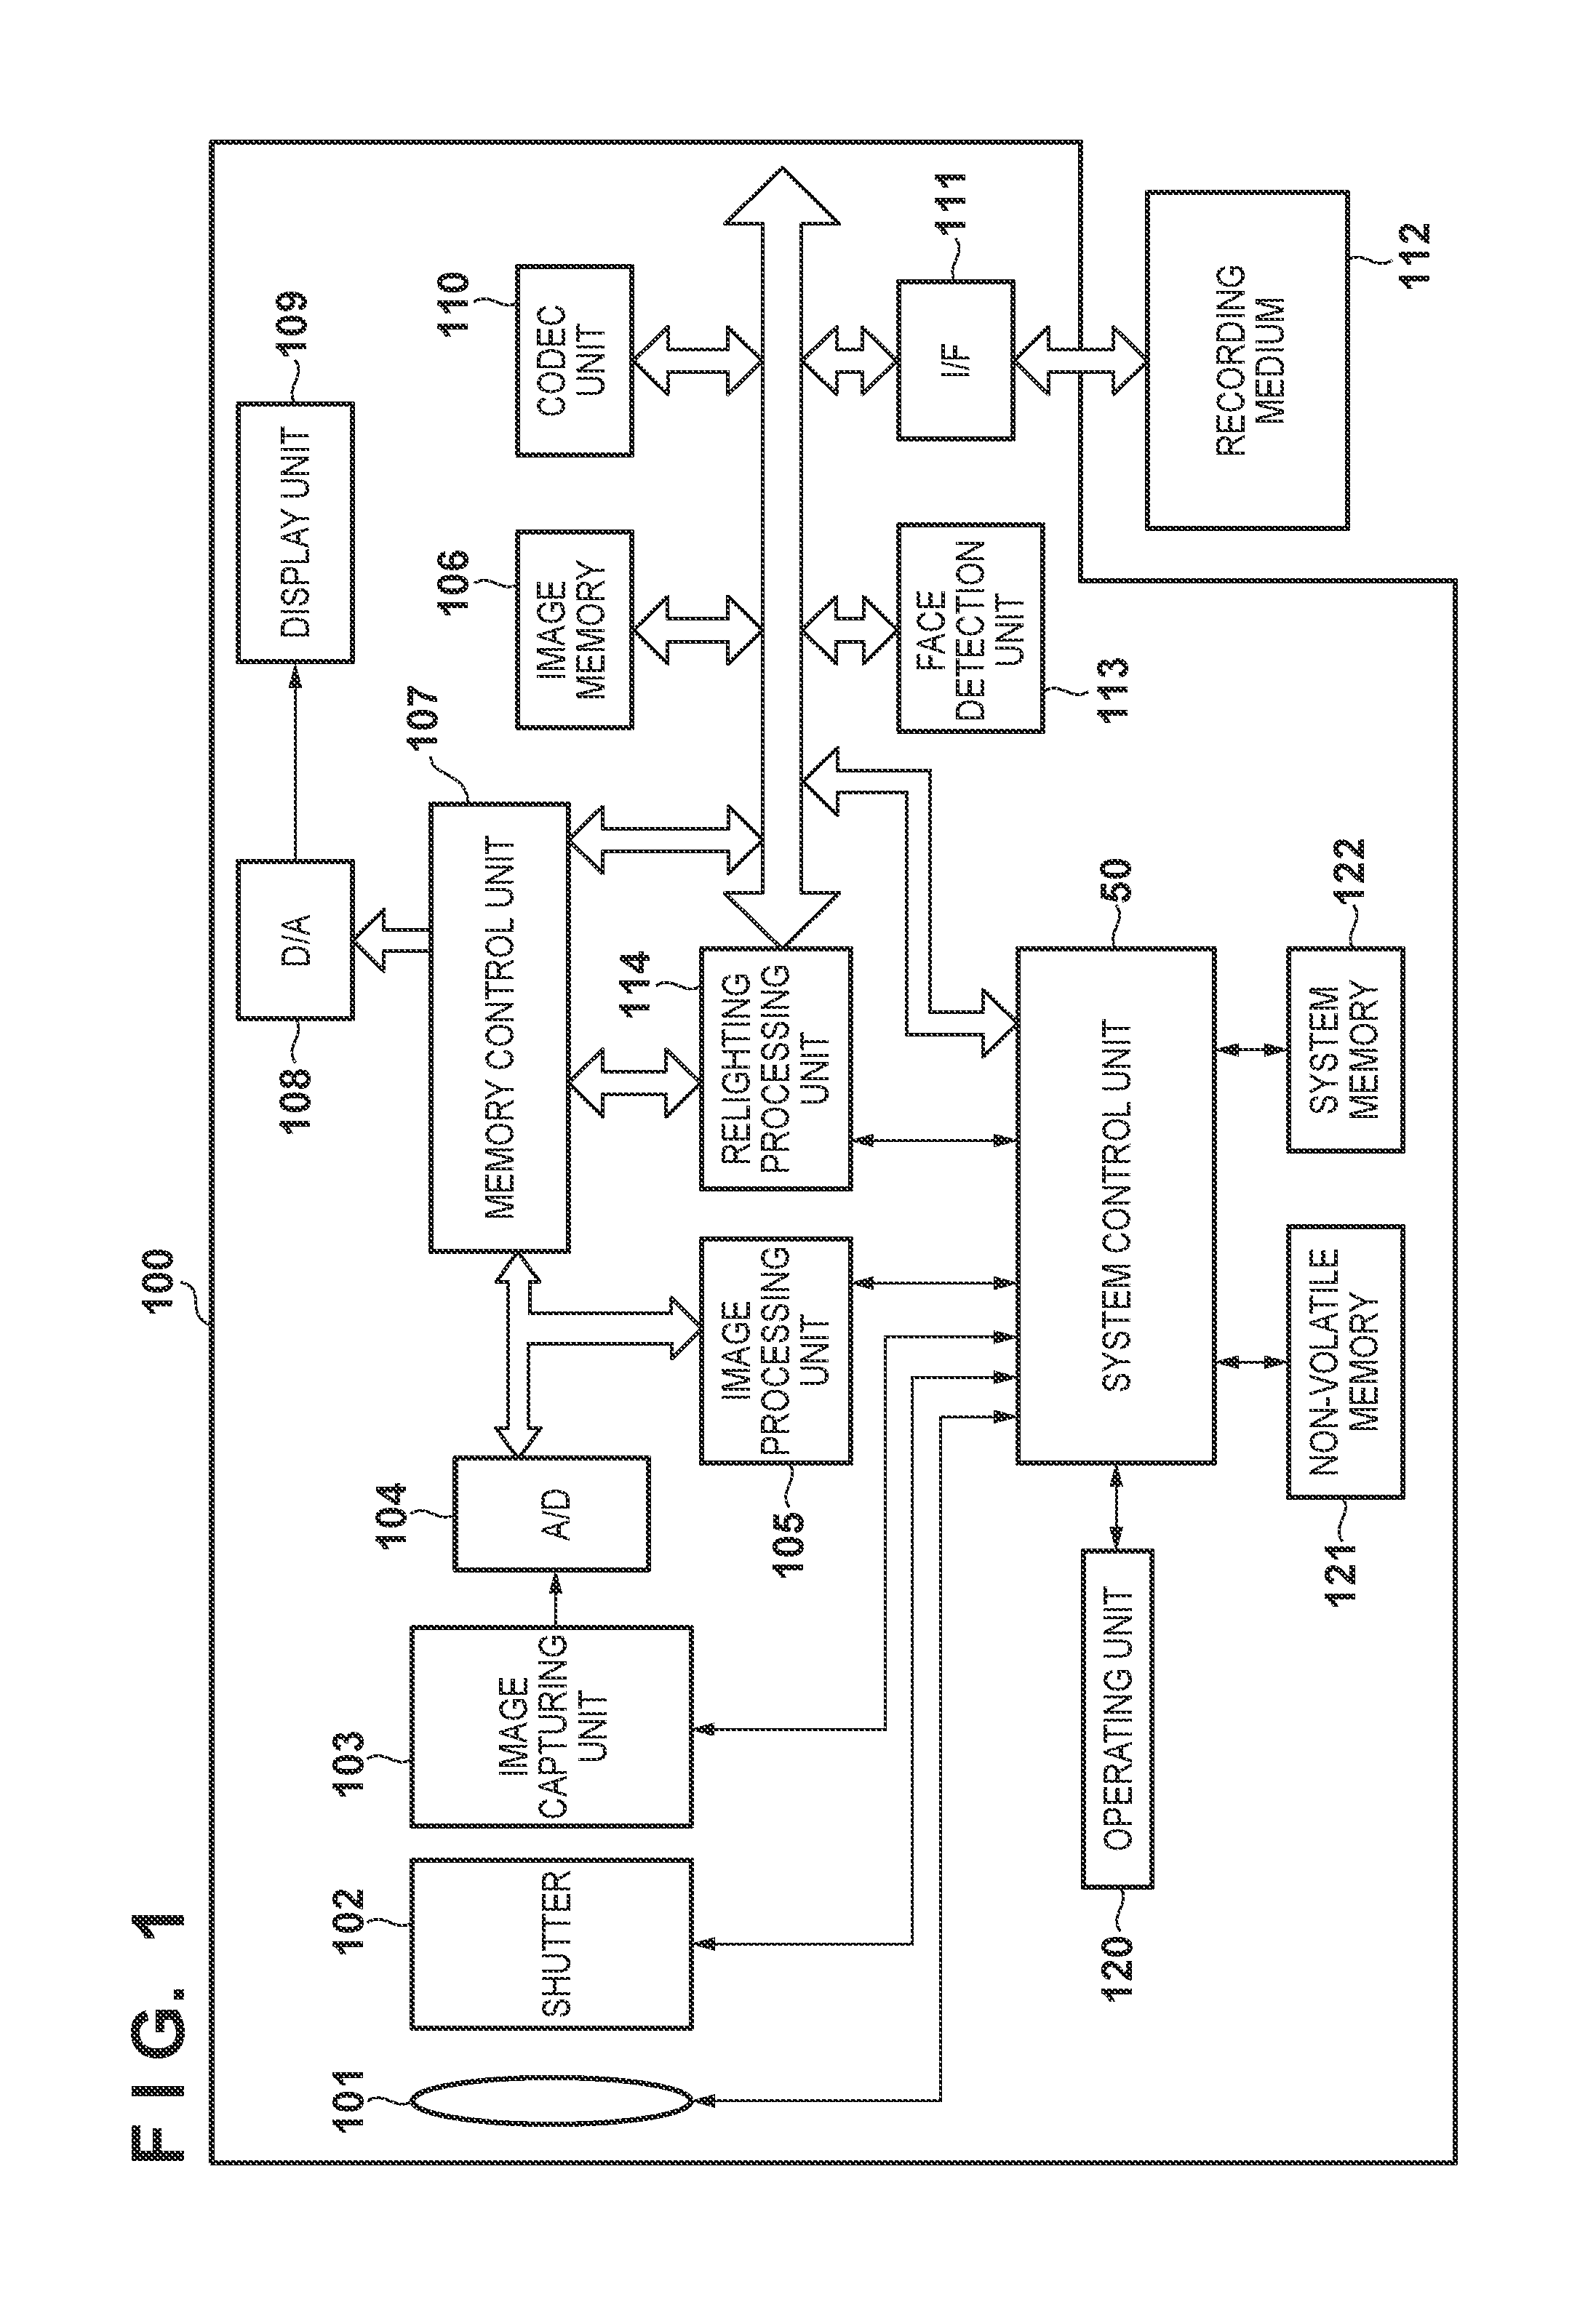 Image processing apparatus and image processing method thereof